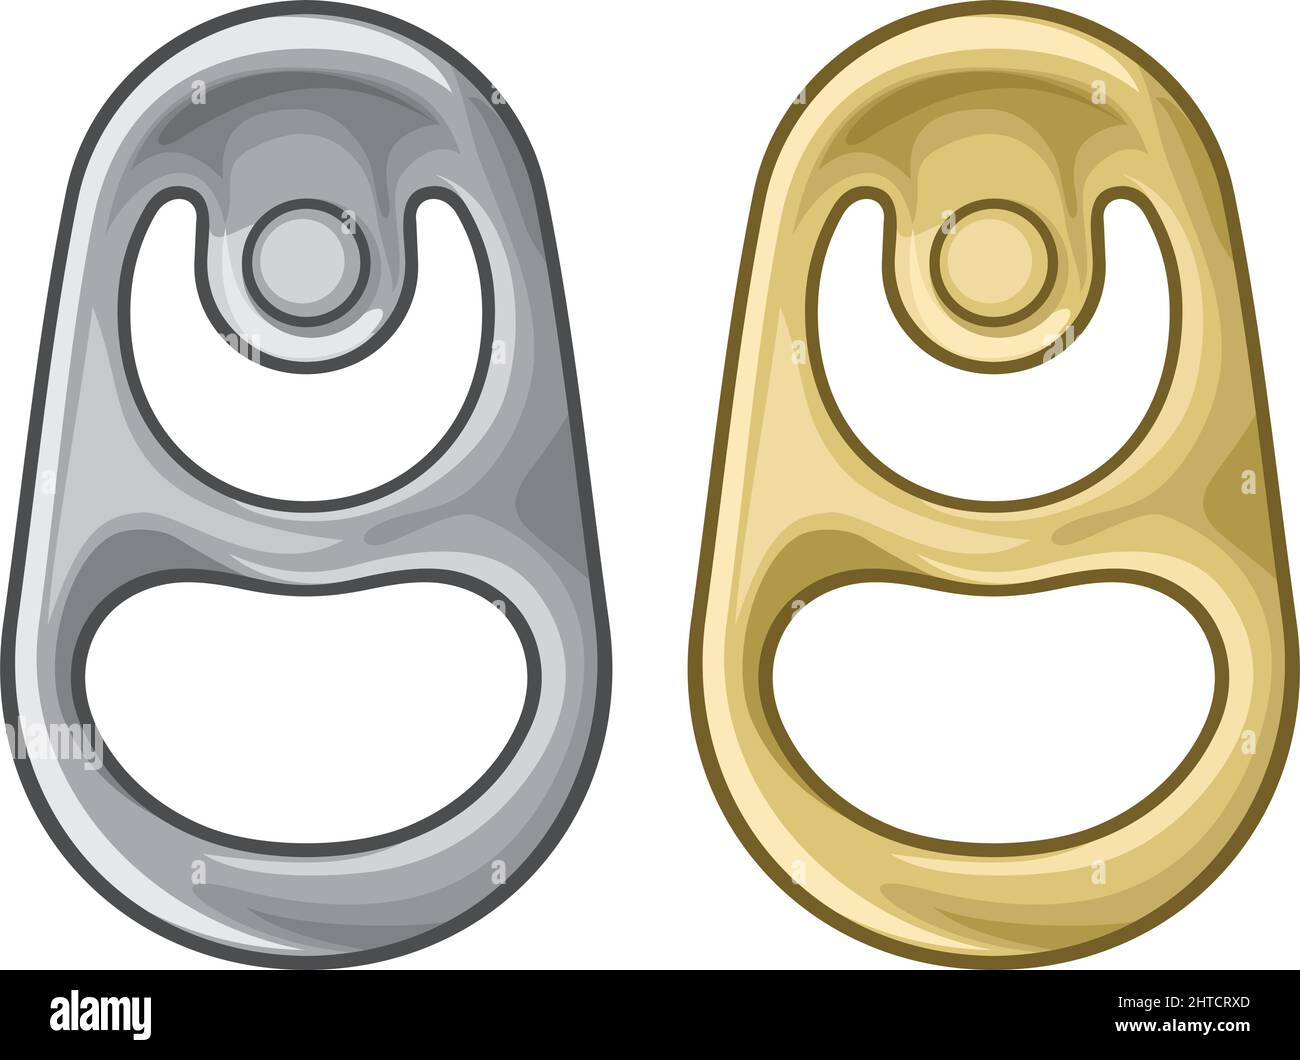 Metal ring of can vector illustration Stock Vector